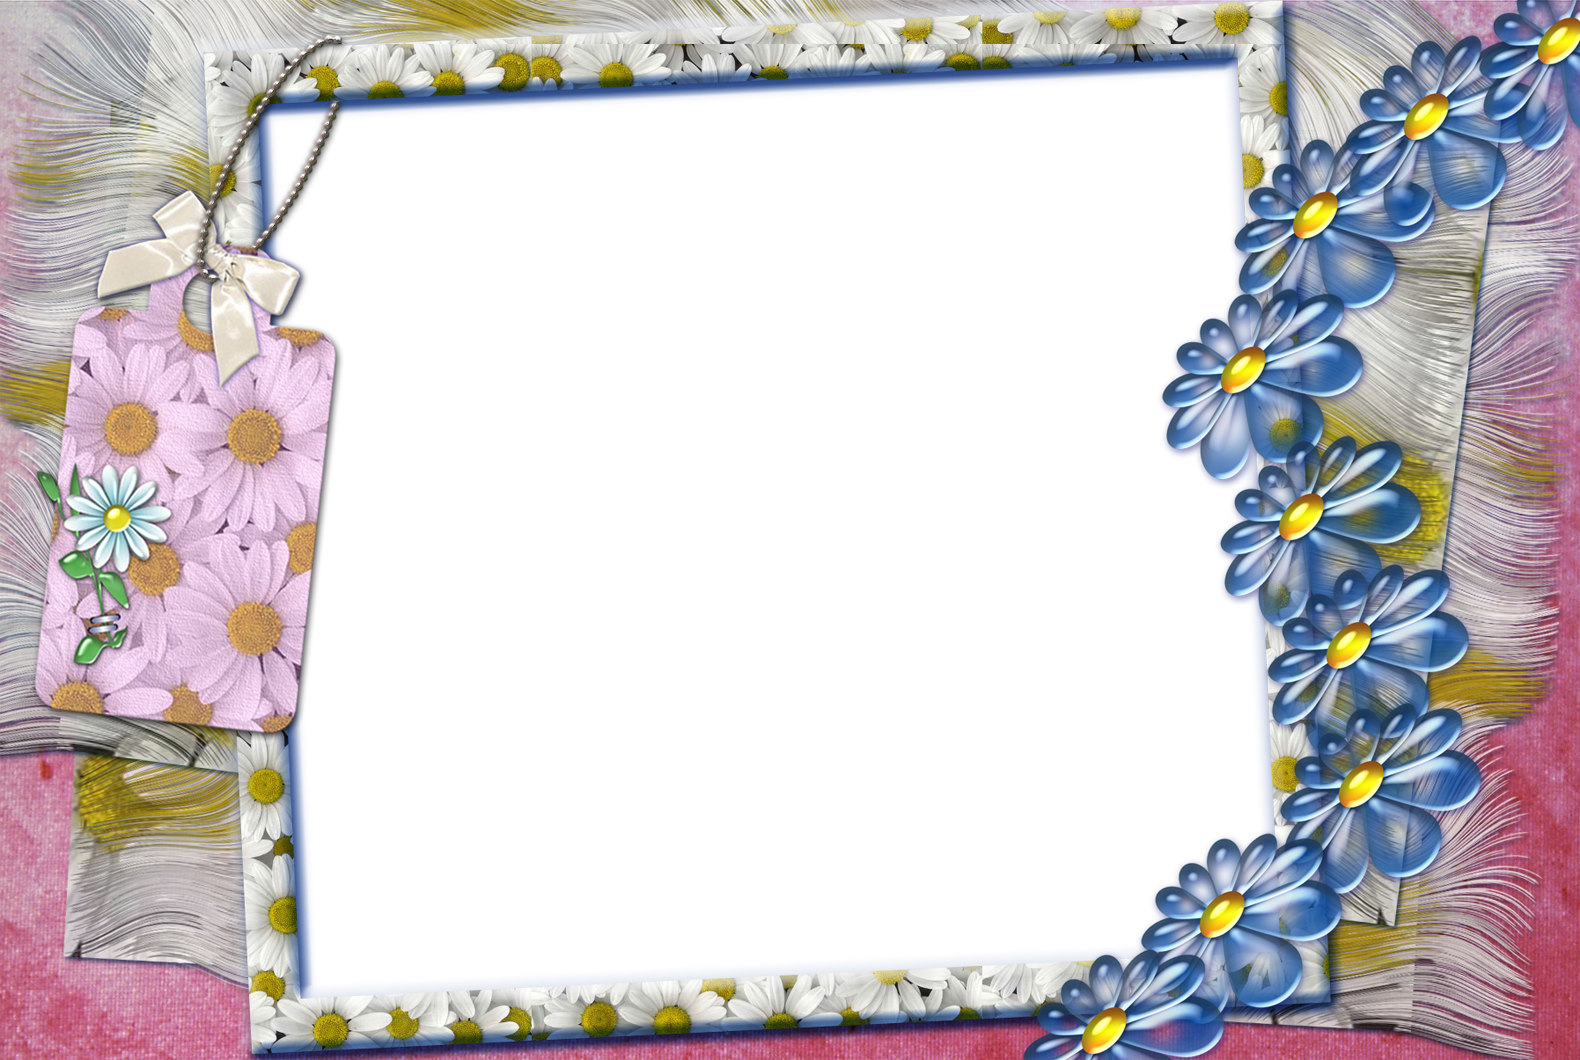 Frame decoration with daisy free powerpoint background